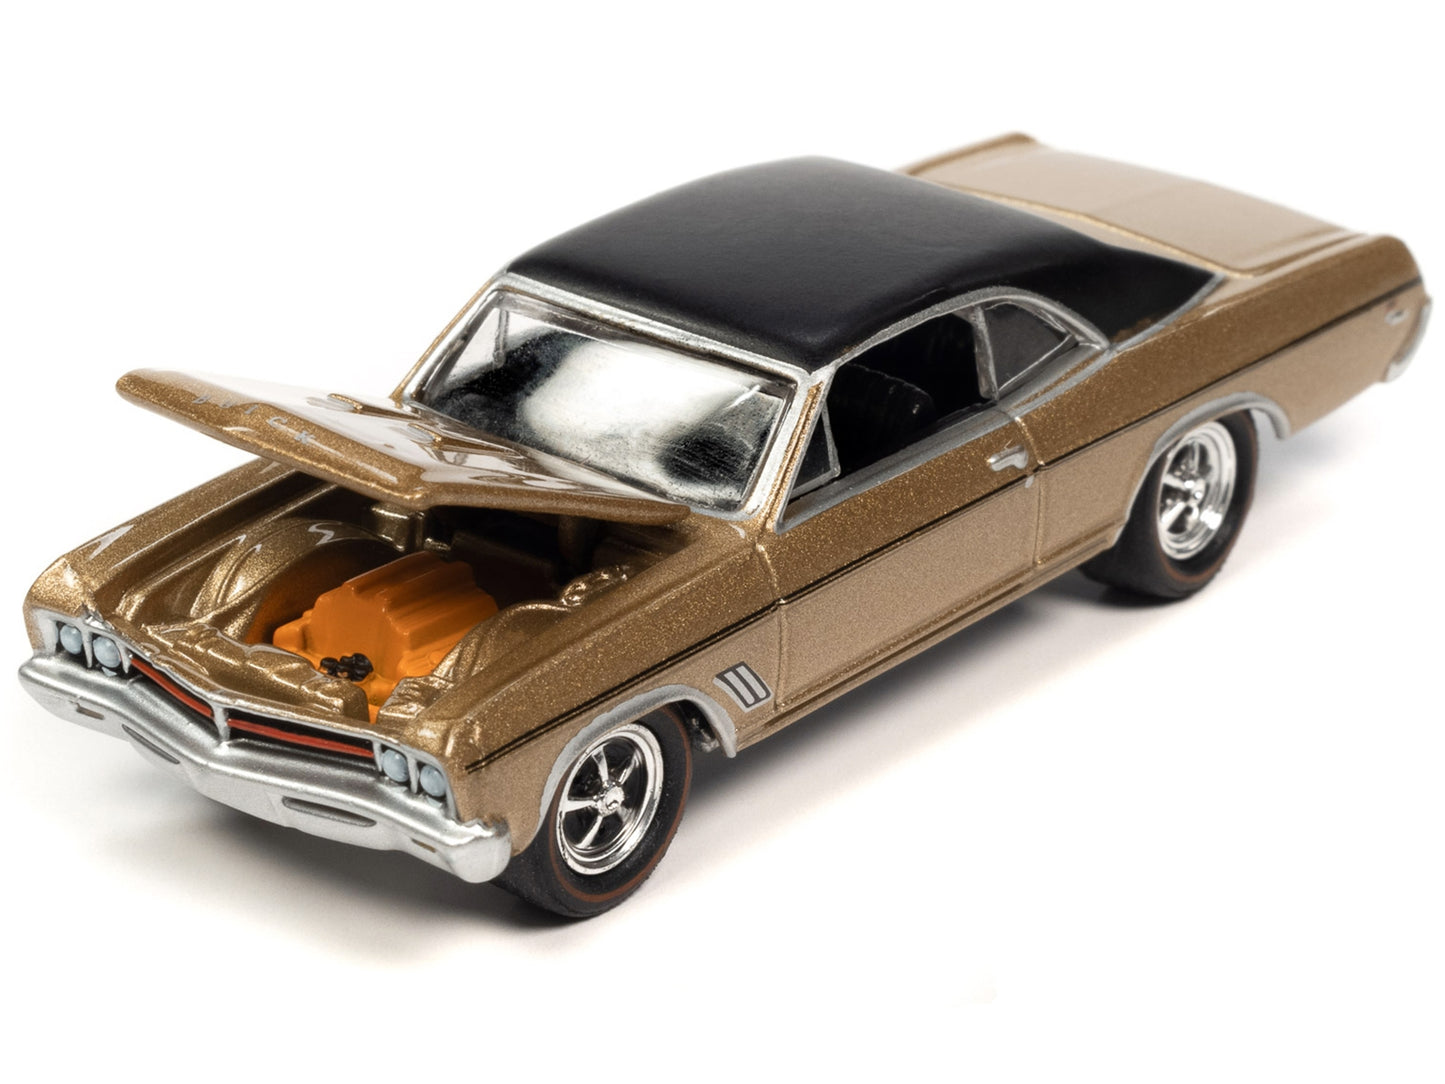 1967 Buick GS 400 Gold Mist Metallic with Matt Black Top Limited Edition to 2524 pieces Worldwide "OK Used Cars" 2023 Series 1/64 Diecast Model Car by Johnny Lightning